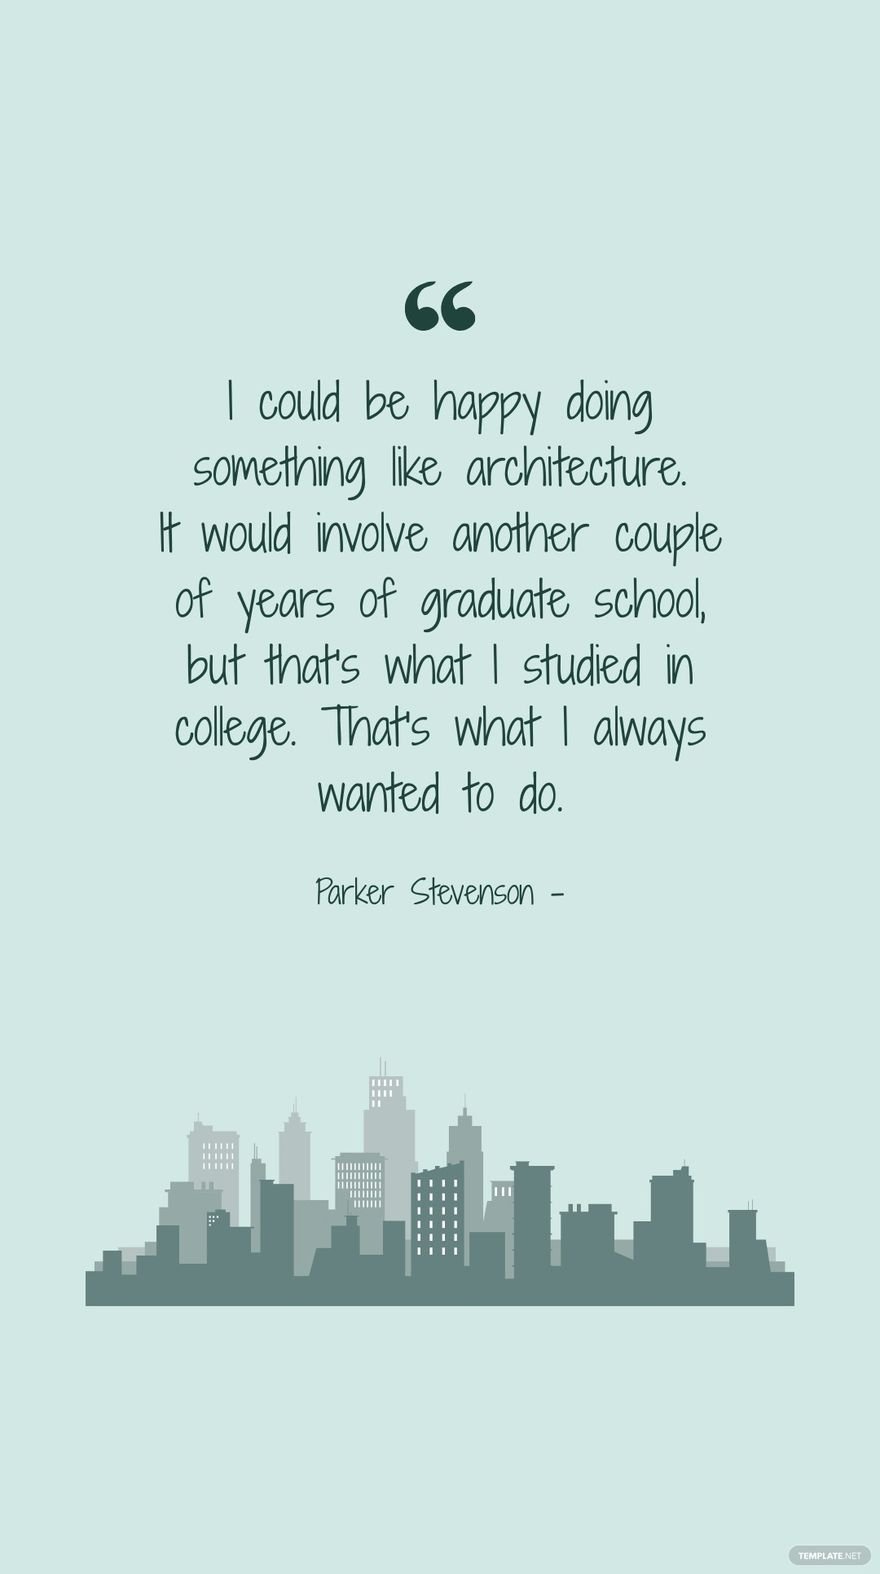 Free Parker Stevenson - I could be happy doing something like architecture. It would involve another couple of years of graduate school, but that's what I studied in college. That's what I always wanted to